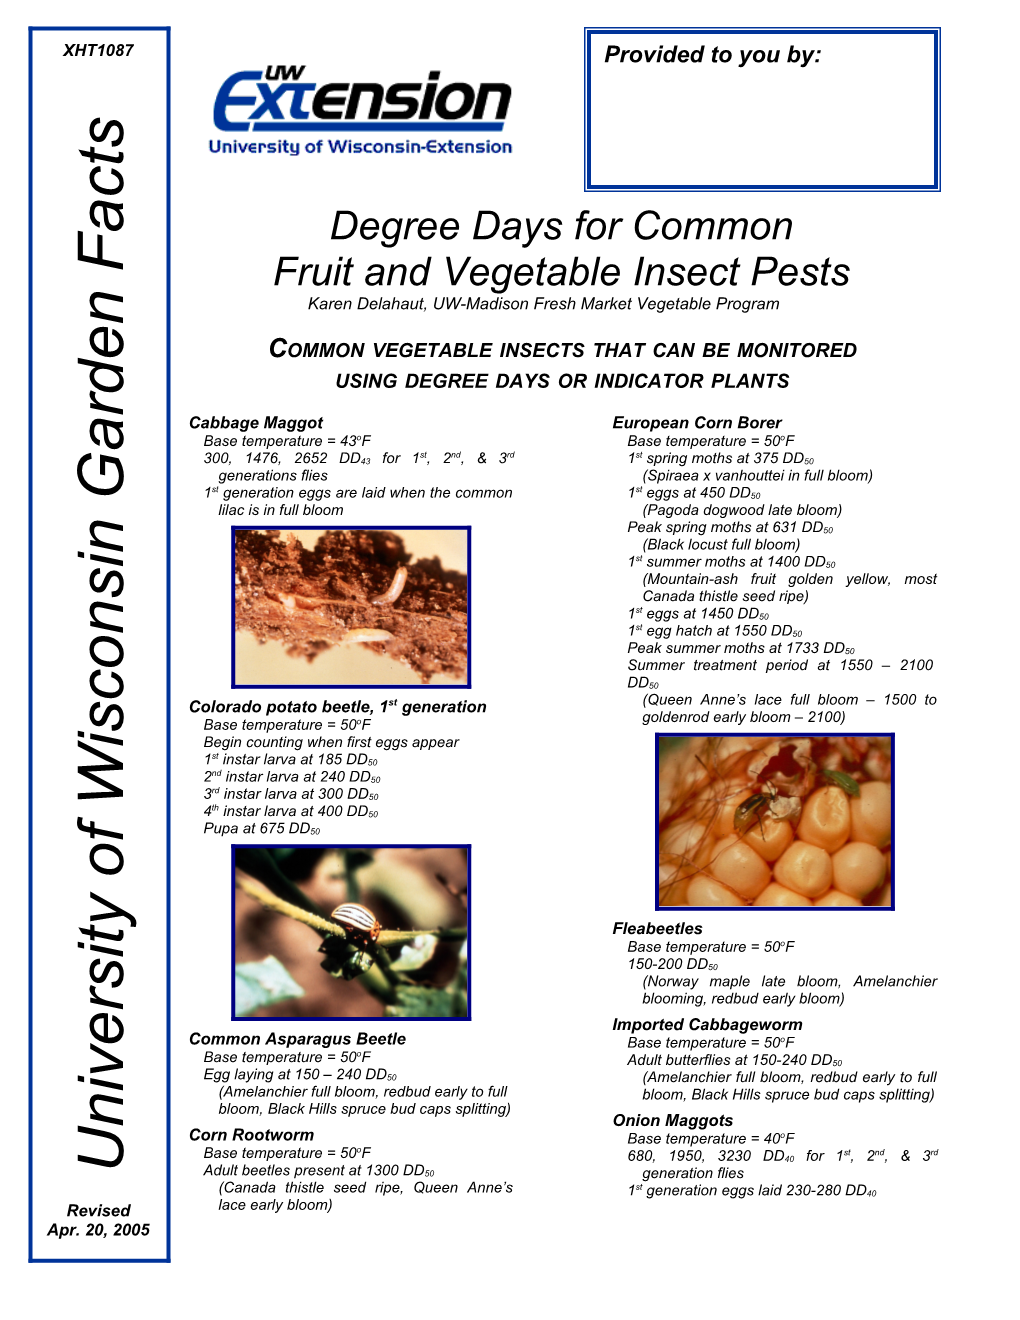 Degree Days for Commonfruit and Vegetable Insect Pests